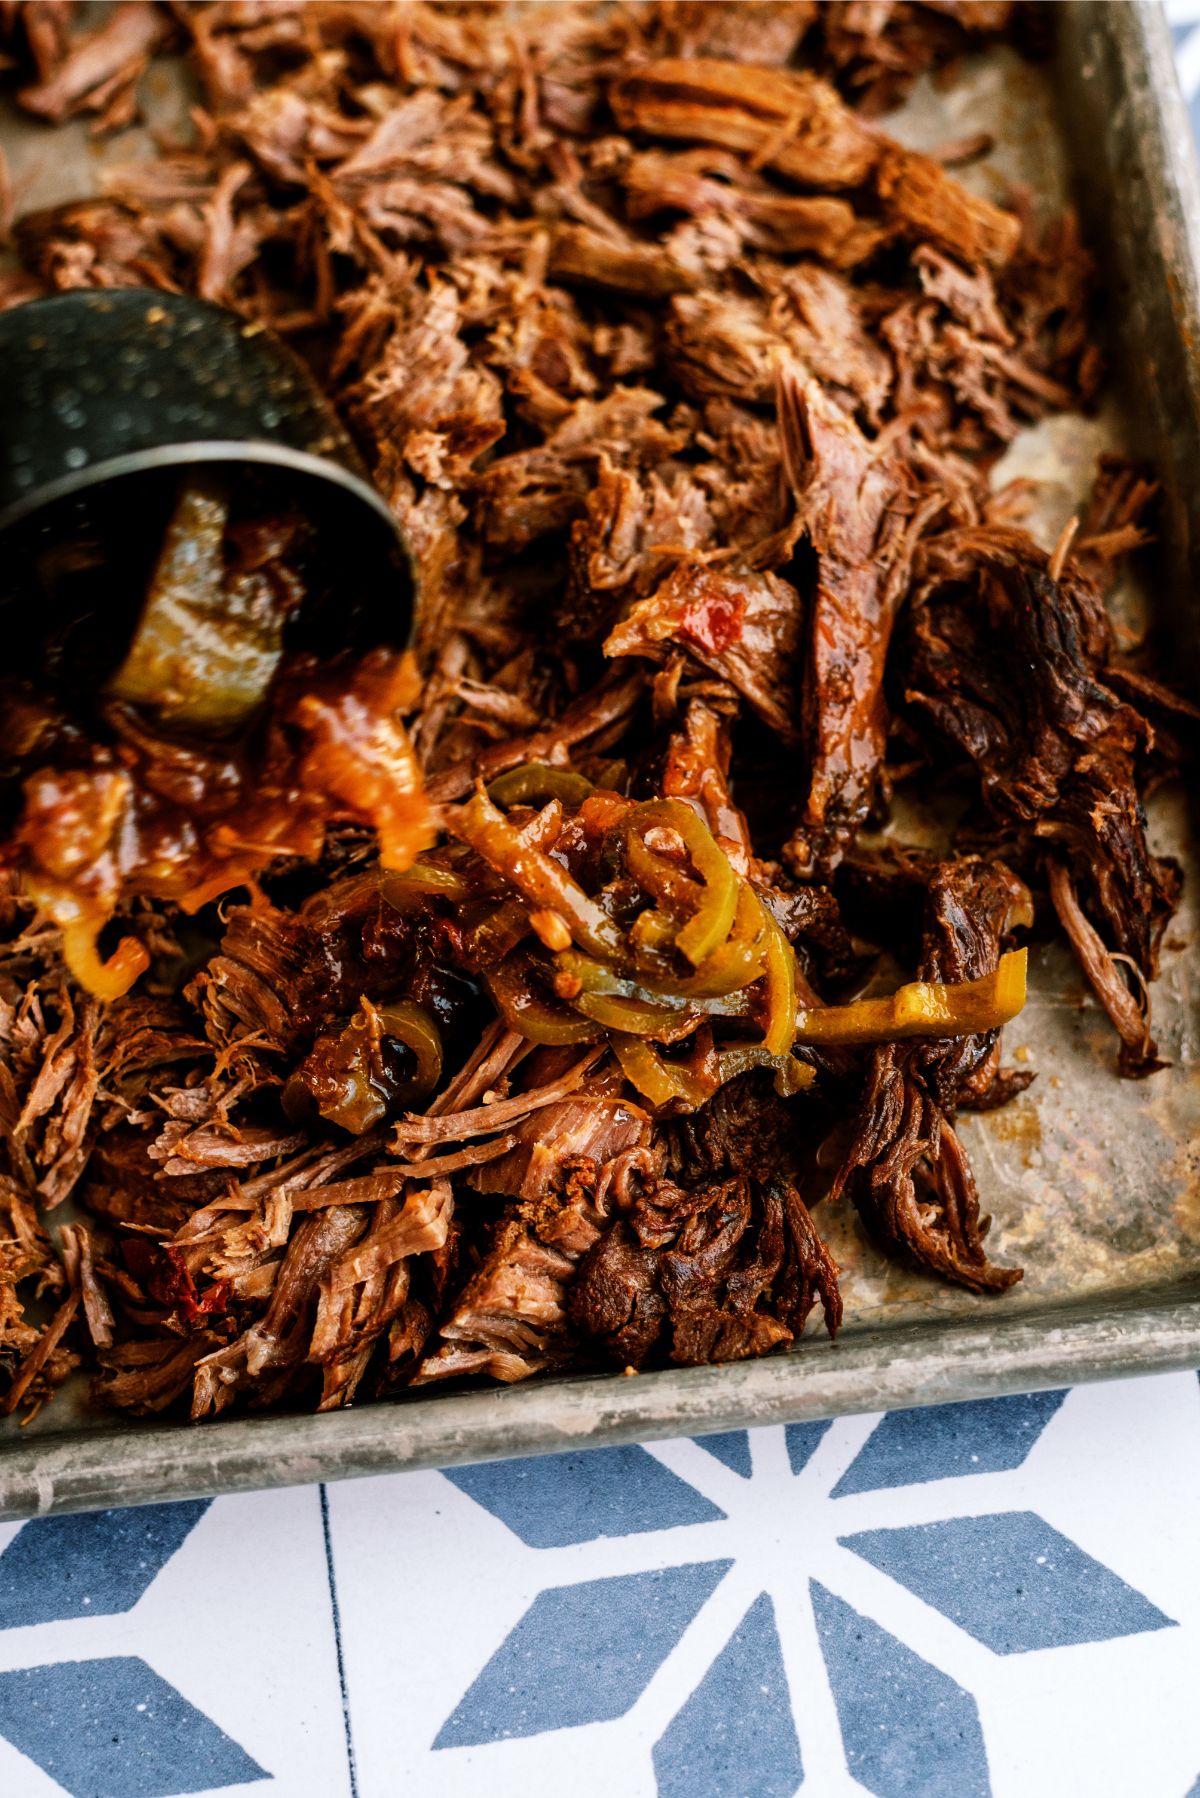 Shredded beef on sheet pan with liquid from the slow cooker poured on top